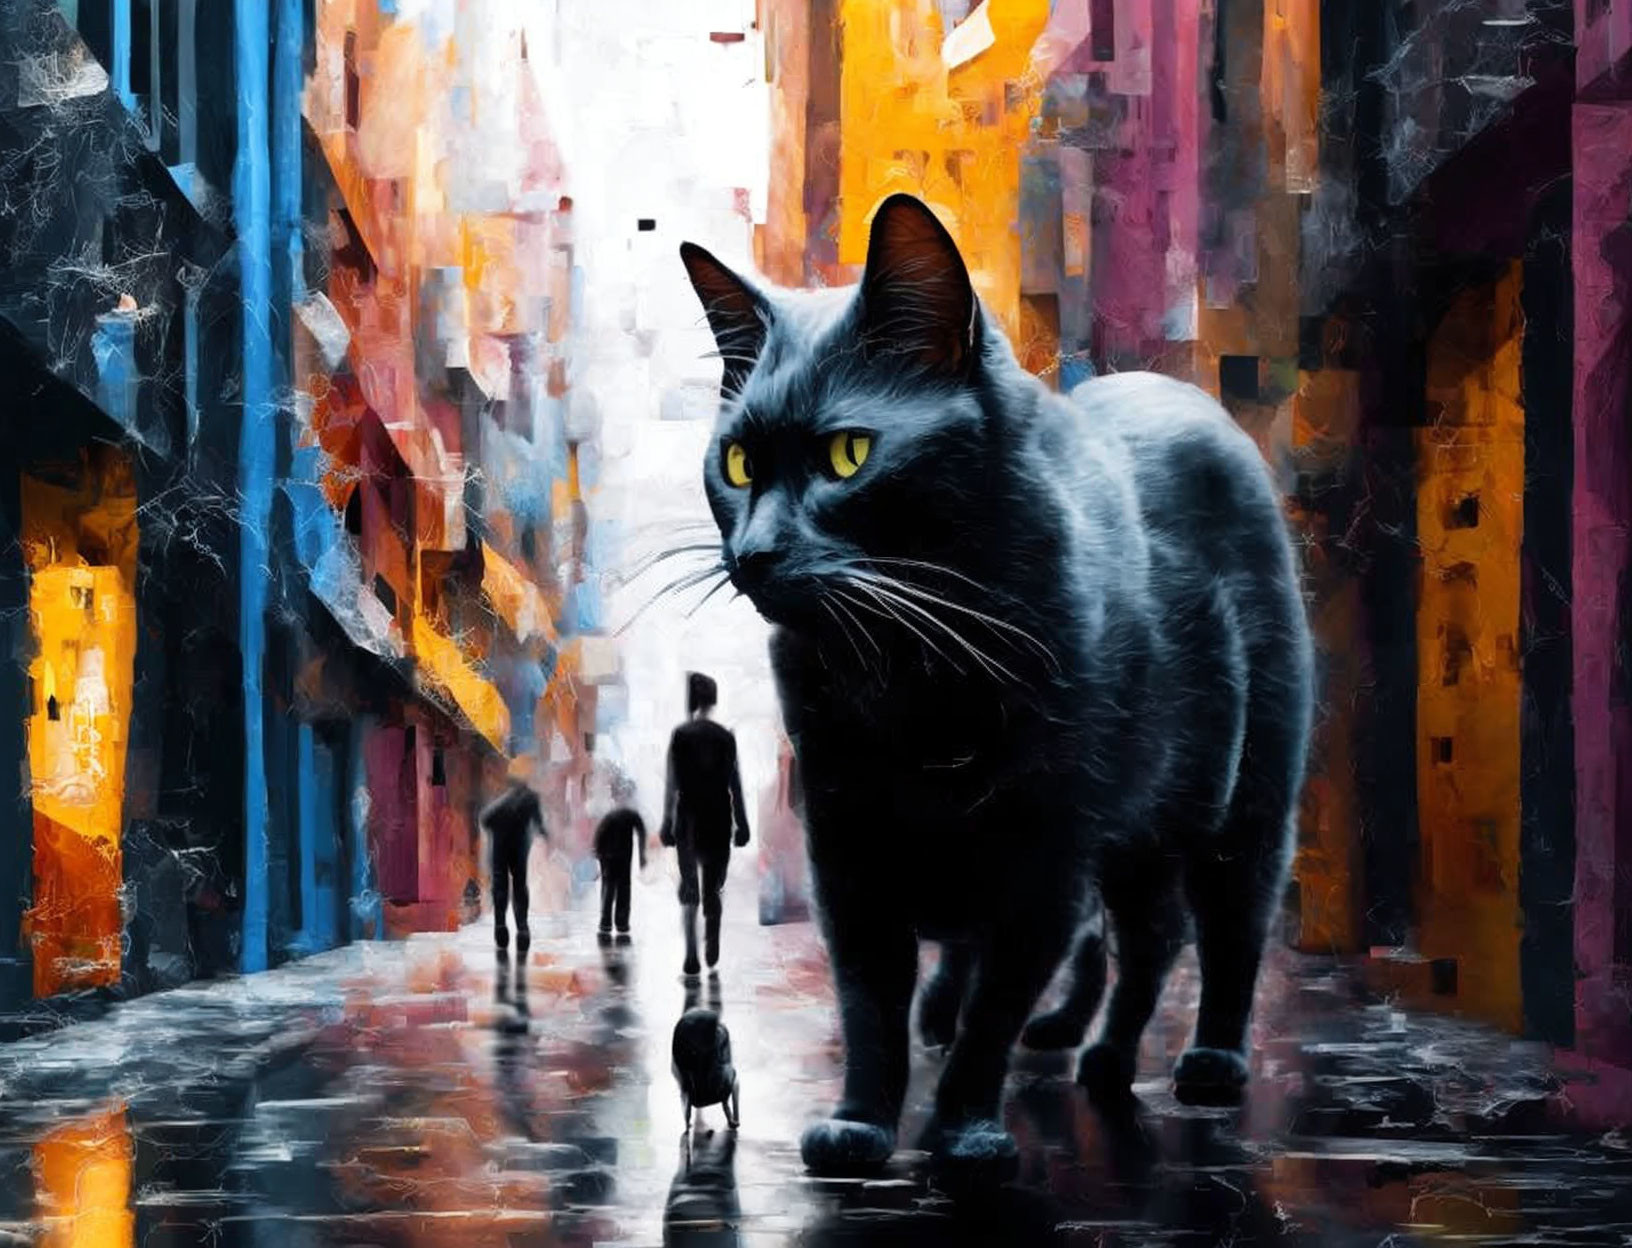 Abstract cityscape painting with large black cat and silhouetted human figures.